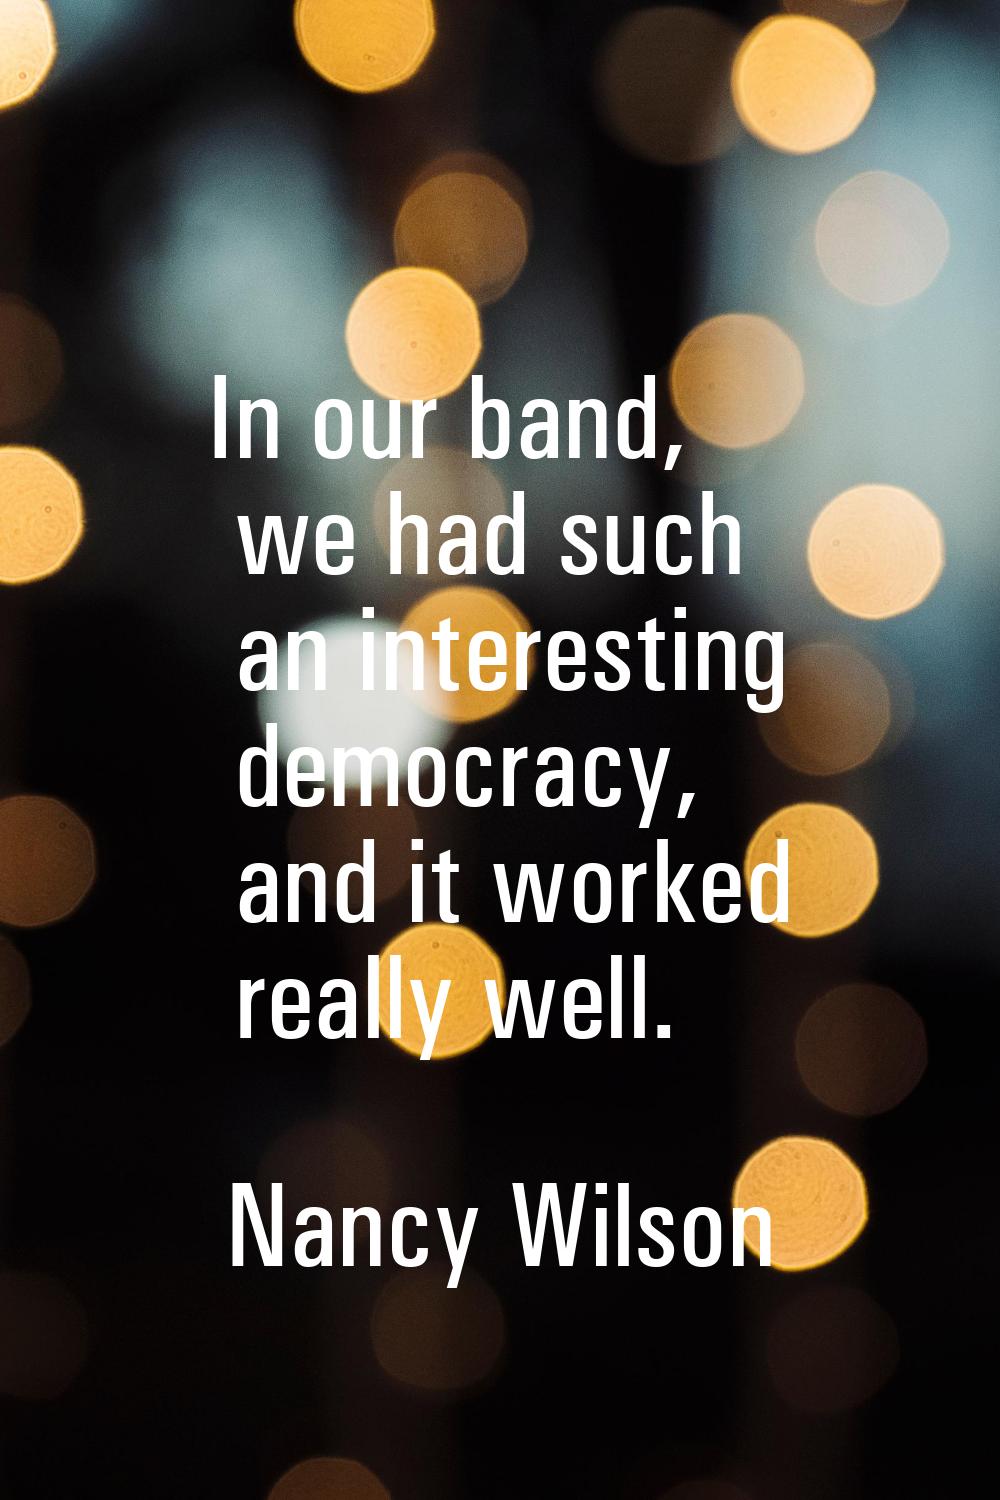 In our band, we had such an interesting democracy, and it worked really well.